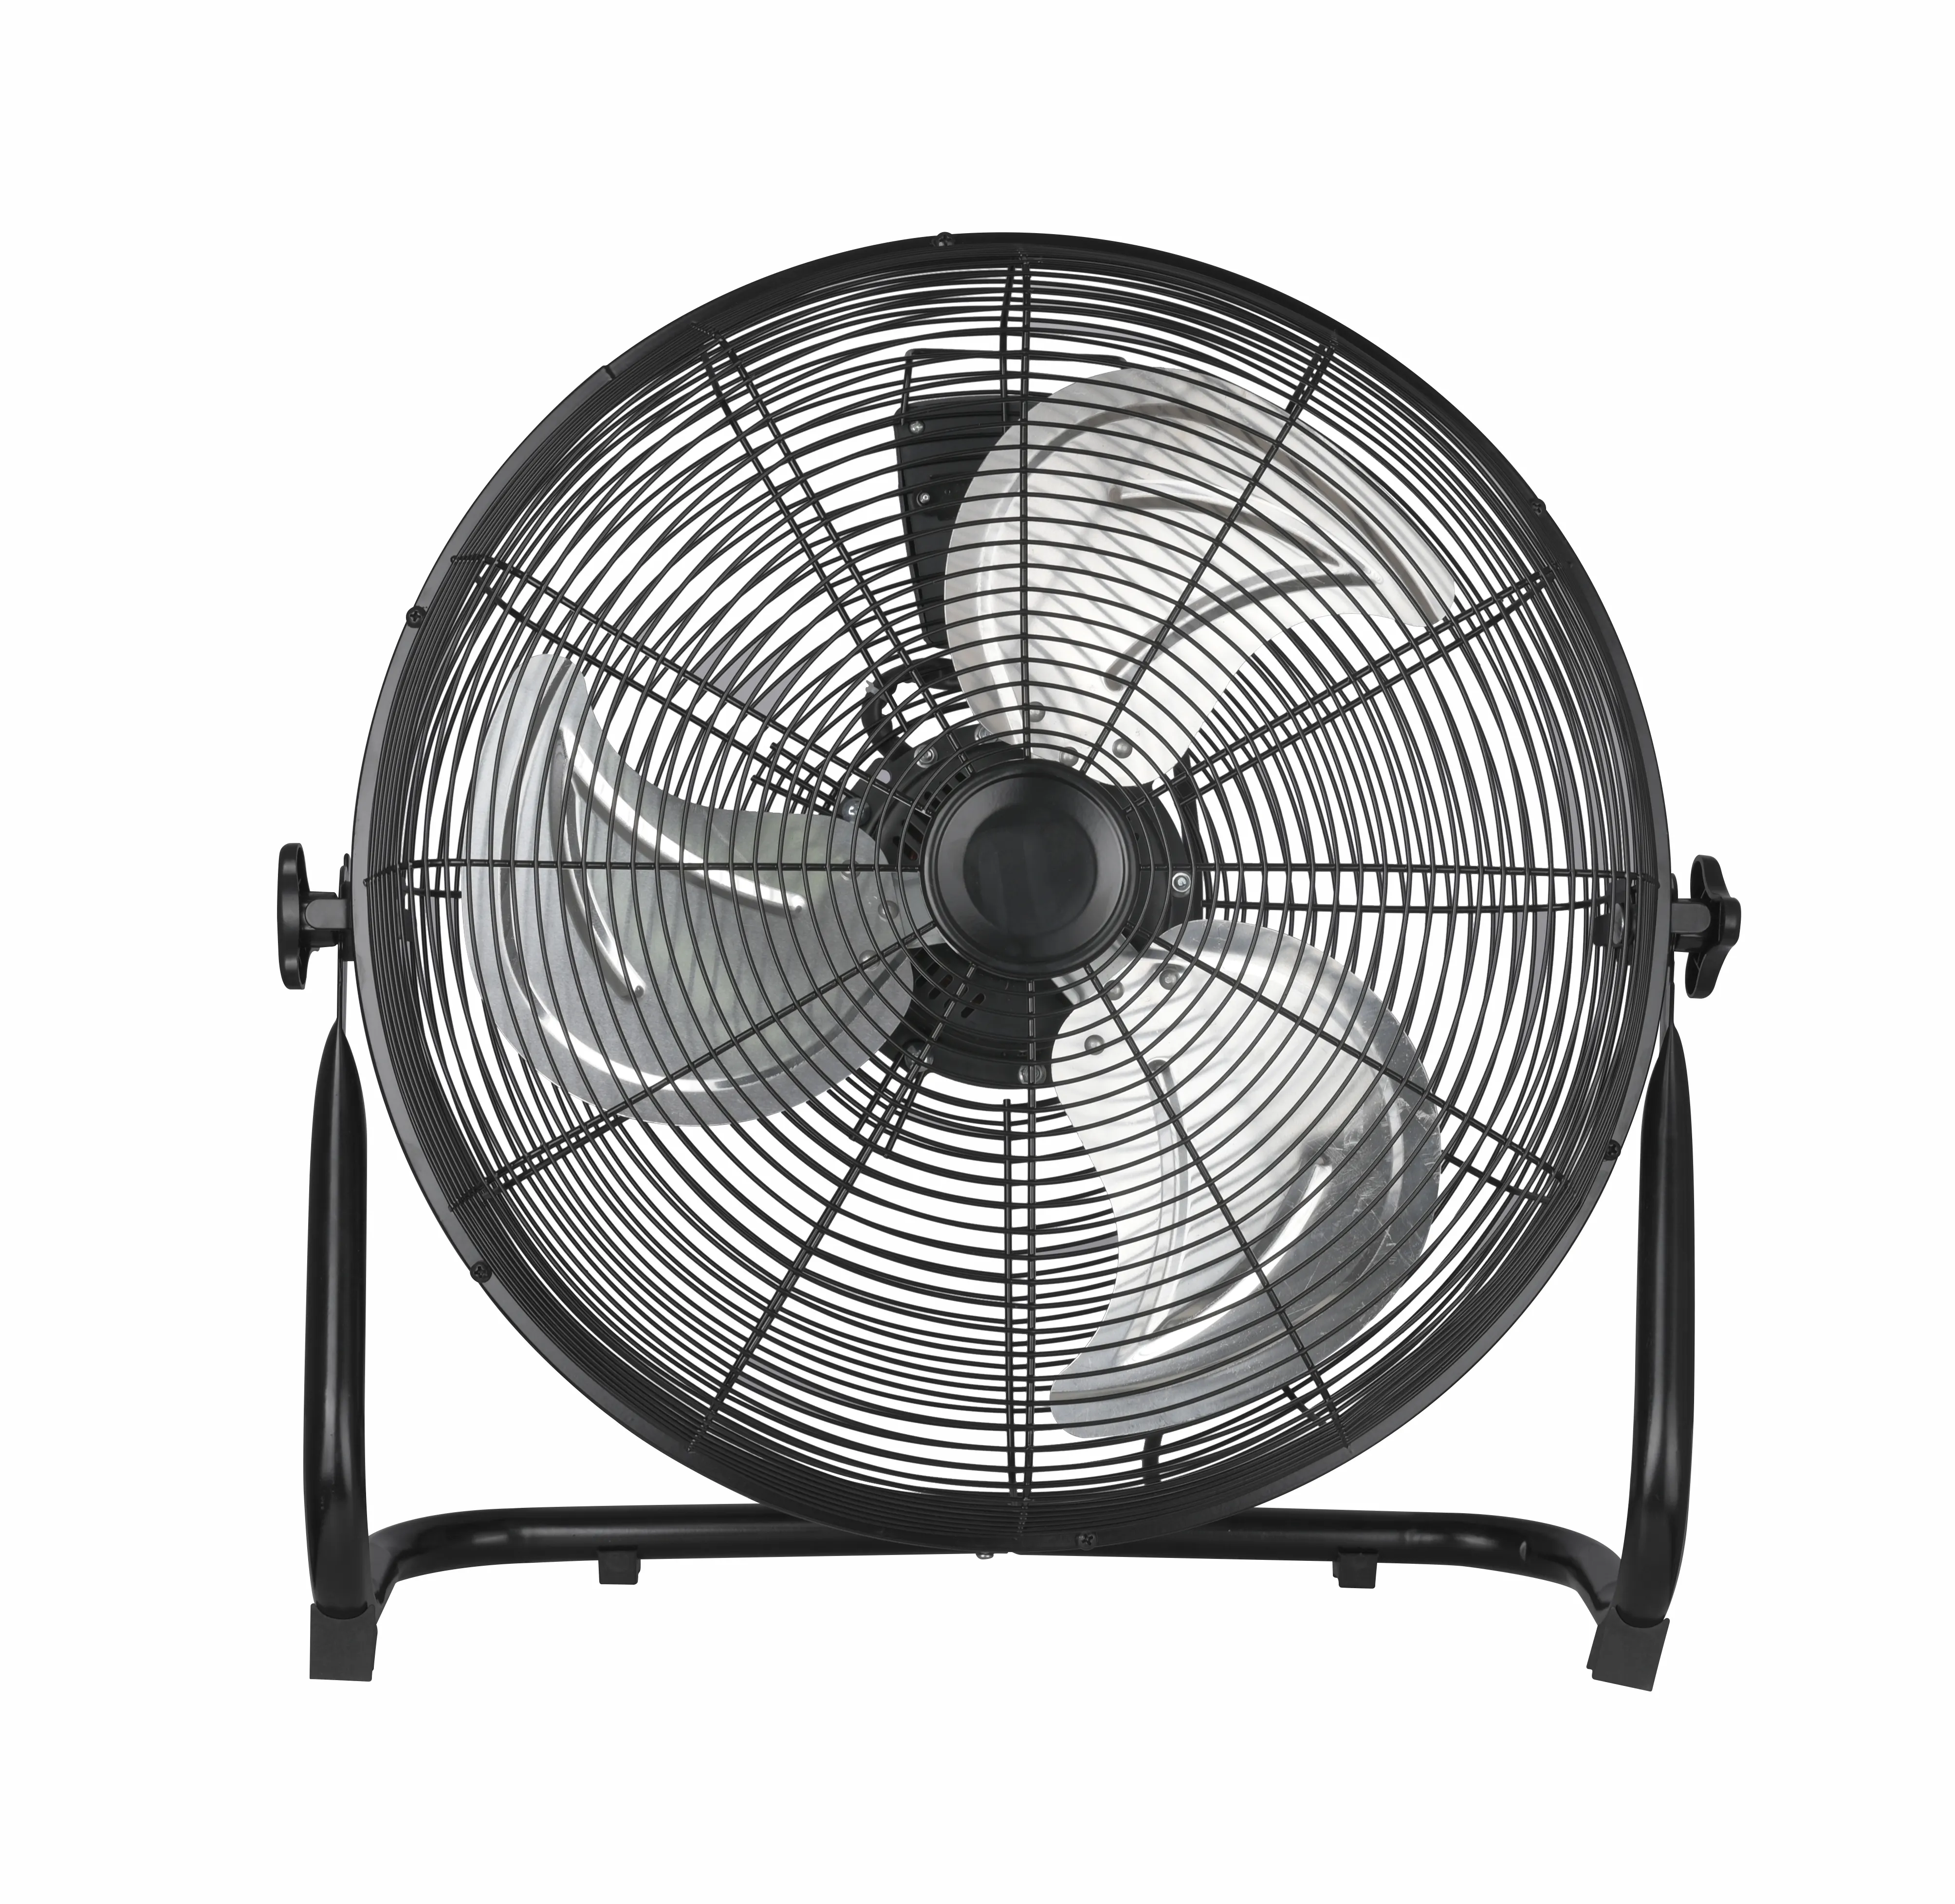 Pivoting Head Metal high-speed Cooling air Home Appliances Retro Floor Fan 3 Speed AC power Three Blade for office workshop